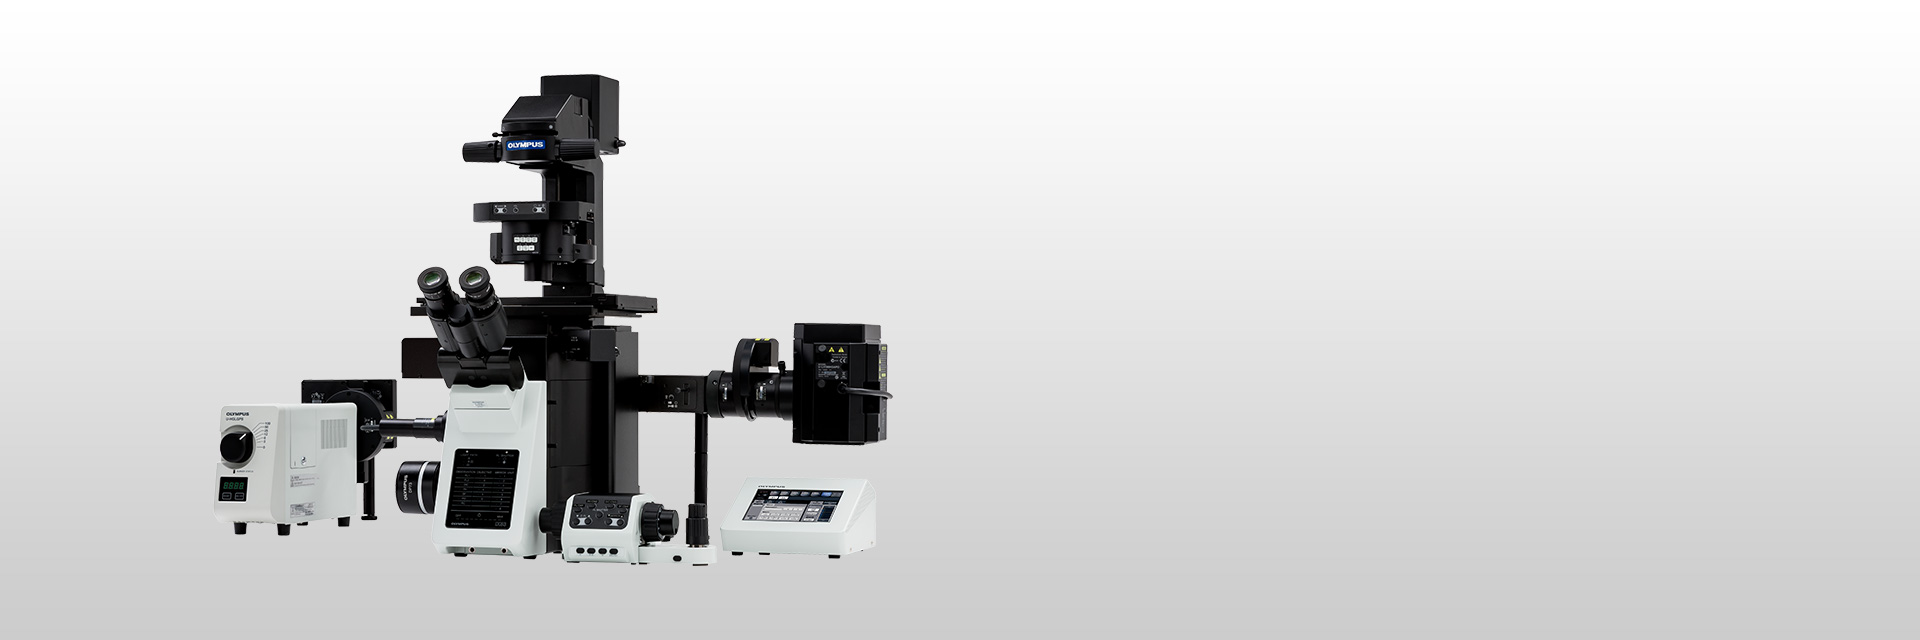 IX83 | Fully-Motorized and Automated Inverted Microscope | Olympus LS